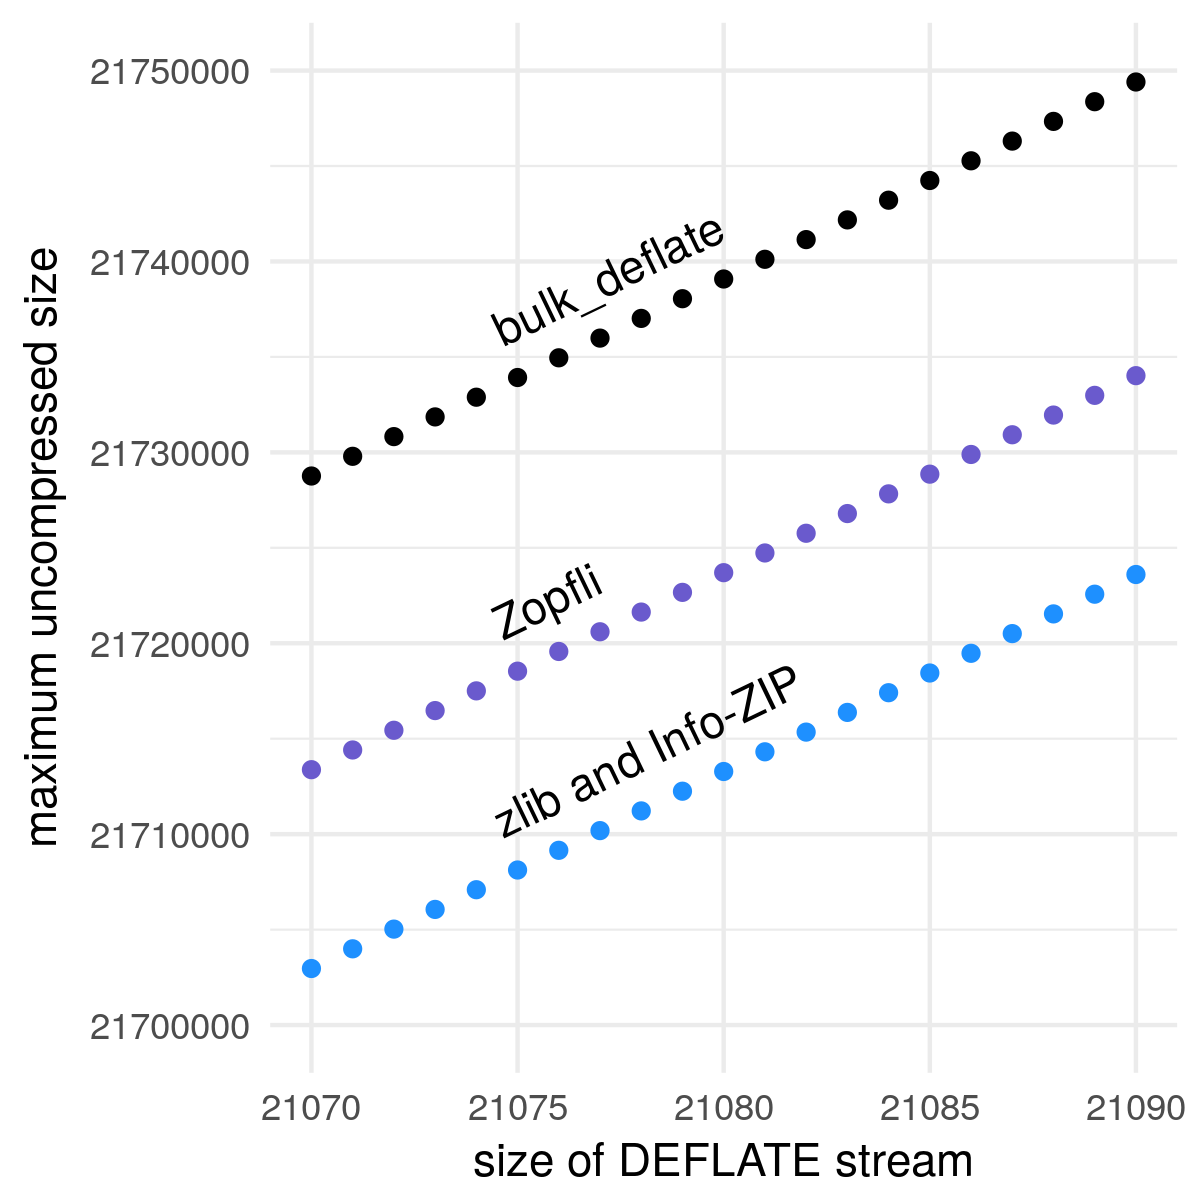 A scatterplot showing the maximum uncompressed data for a given DEFLATE stream size, for four compression engines: bulk_deflate, Zopfli, zlib, and Info-ZIP. The points form three lines because zlib and Info-ZIP were identical. All three lines have a slope of 1032. For a given DEFLATE stream size, bulk_deflate compresses about 15 kB more than Zopfli, and Zopfli compresses about 10 kB more than zlib/Info-ZIP.